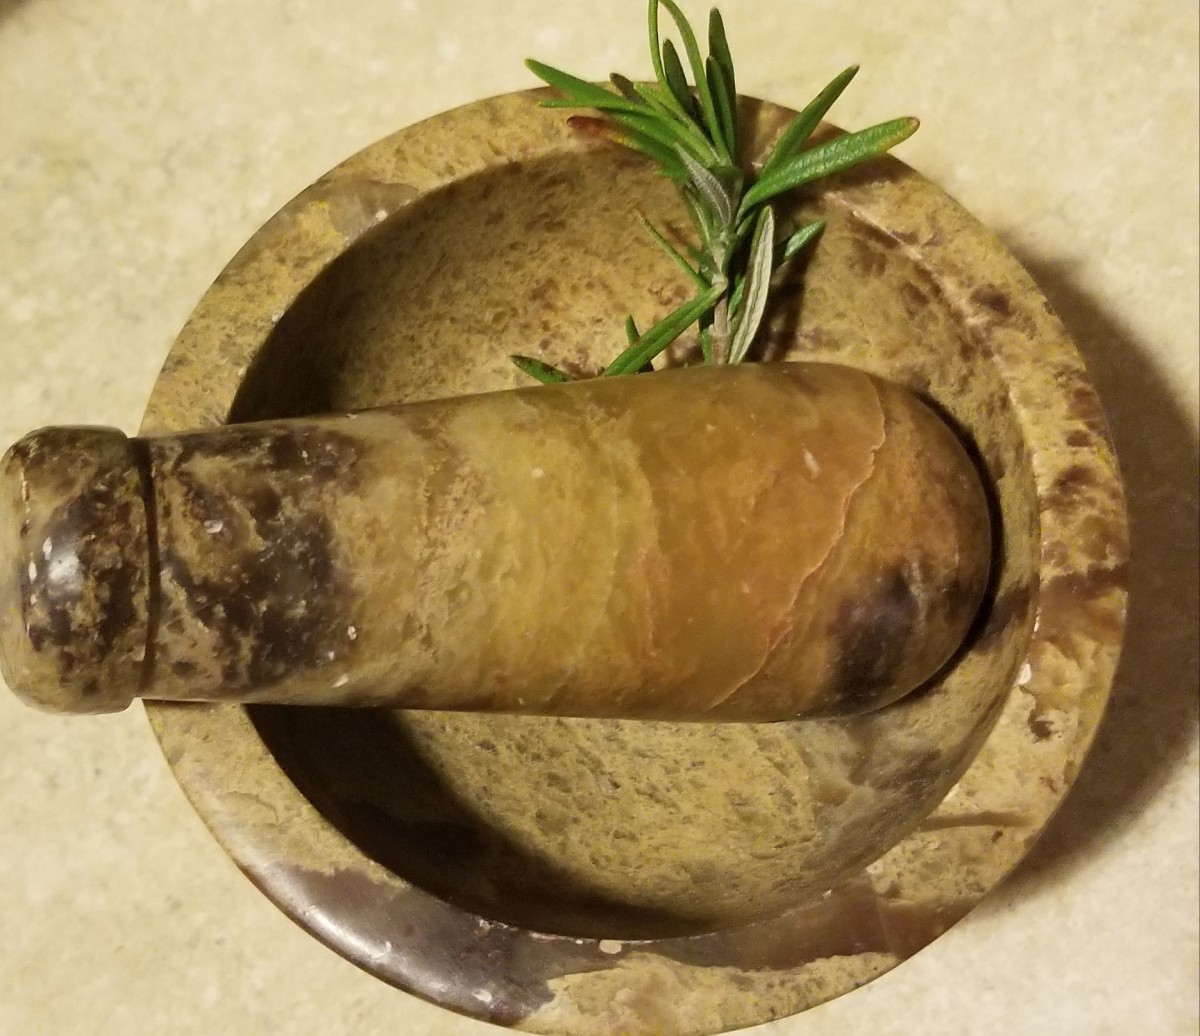 Stay Calm and Crush On: Rosemary ready for crushing with my mortar and pestle.